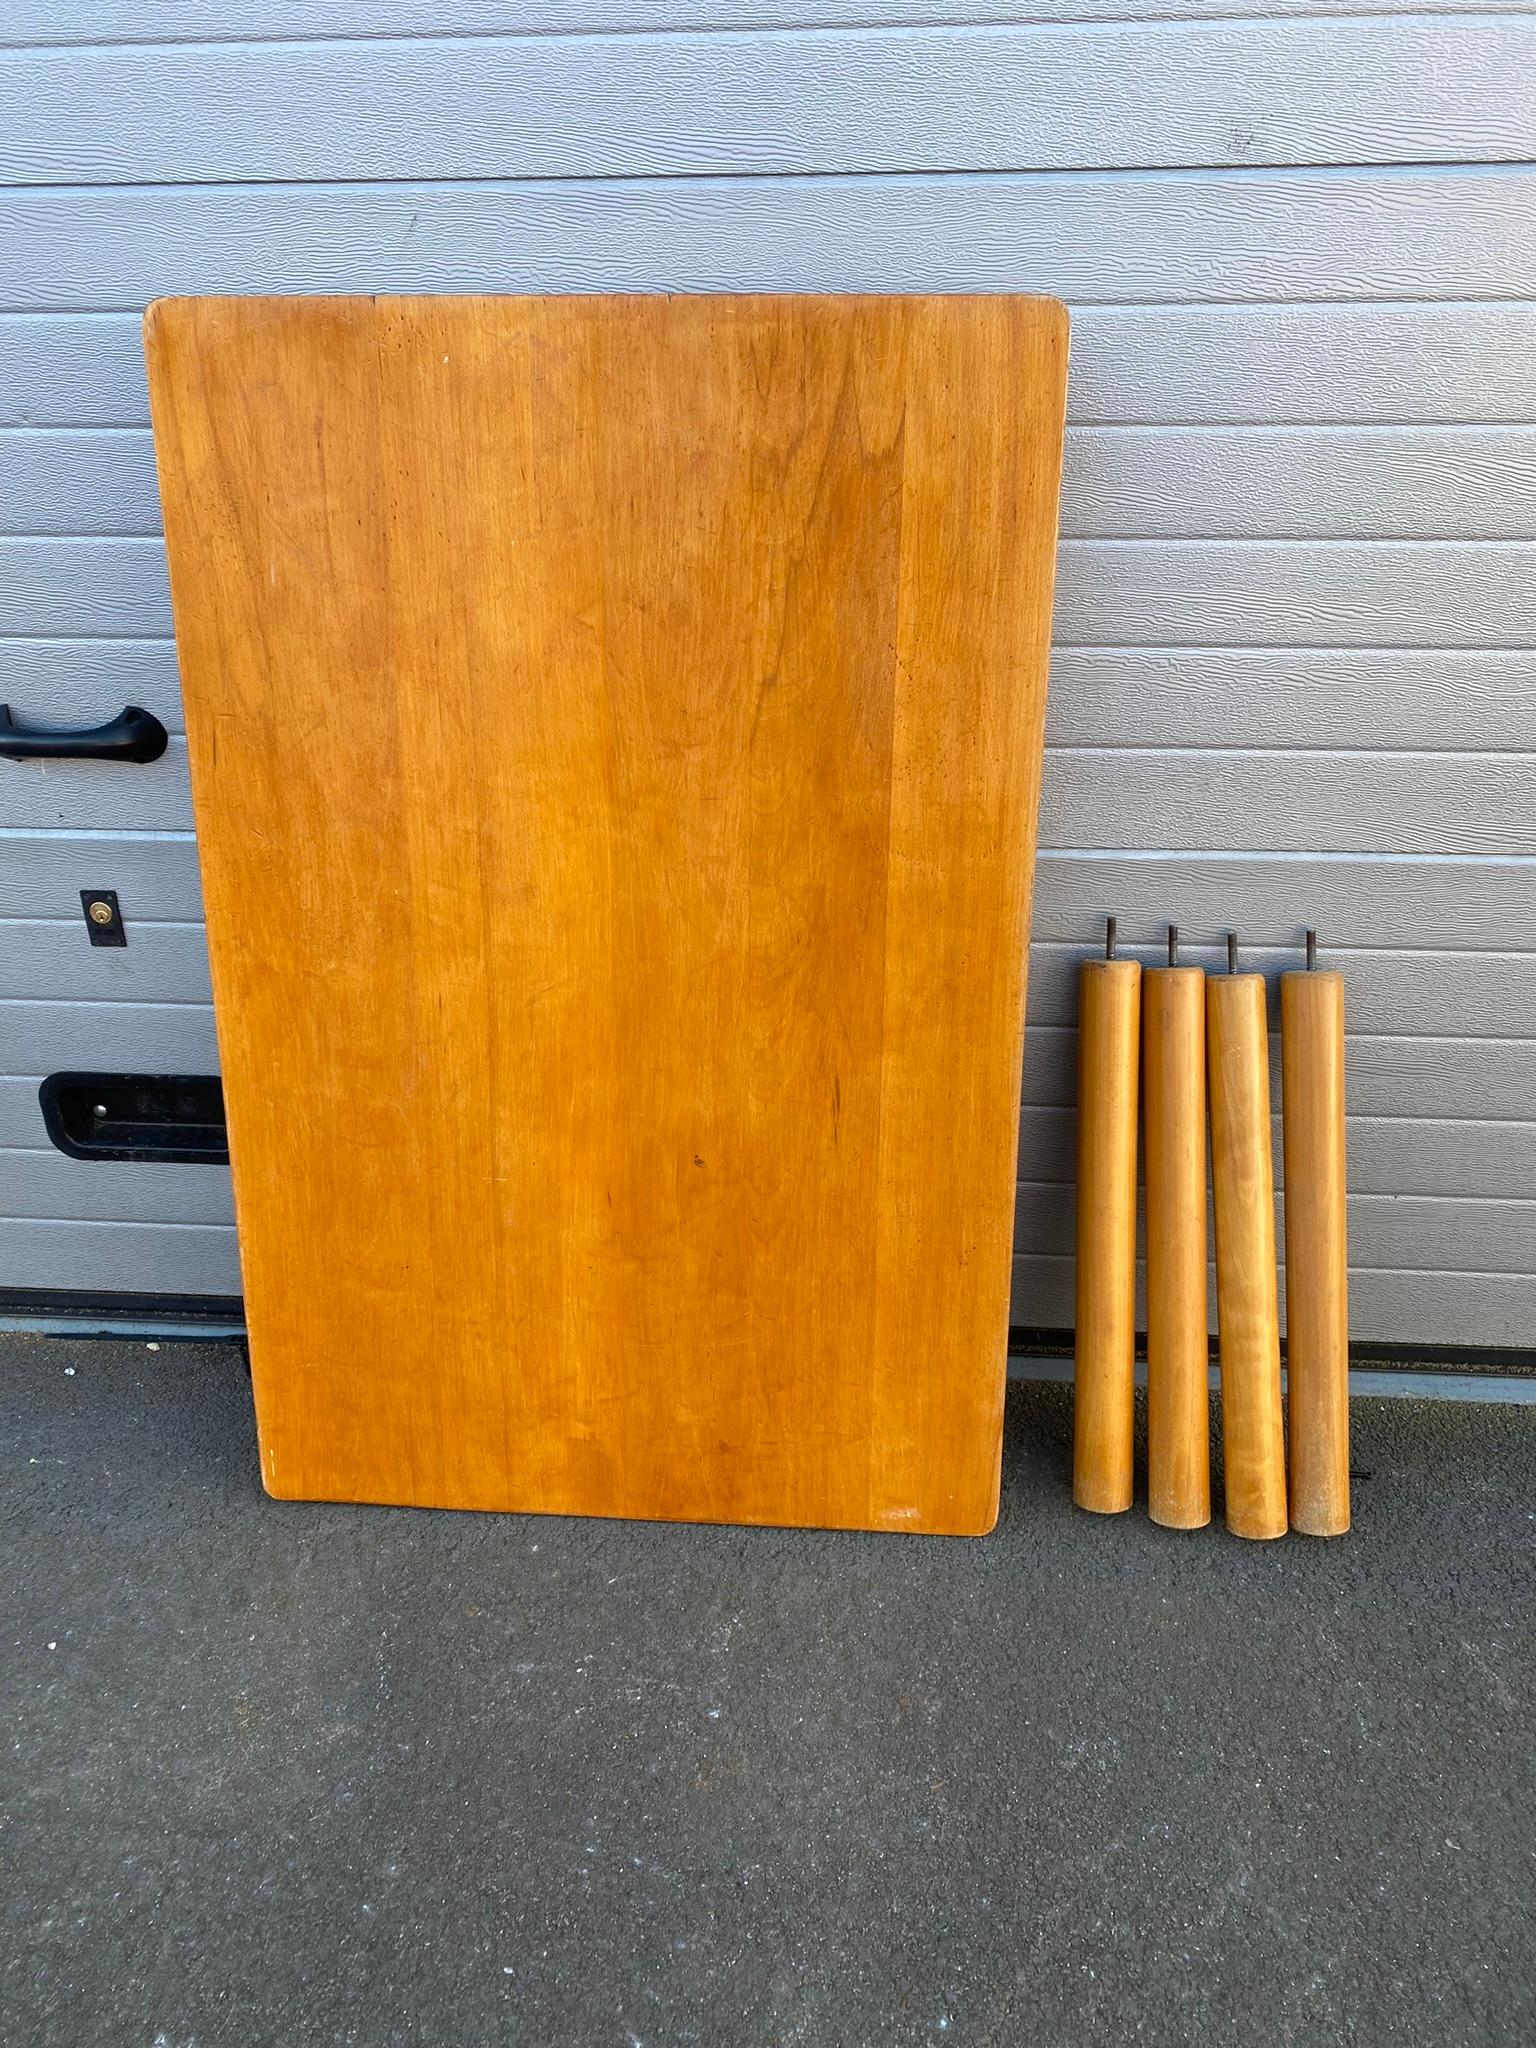 8 Side tables in stained beech, French reconstruction style, circa 1960
The legs can be removed for storage and transport the price is for 1 table, 8 tables are available.